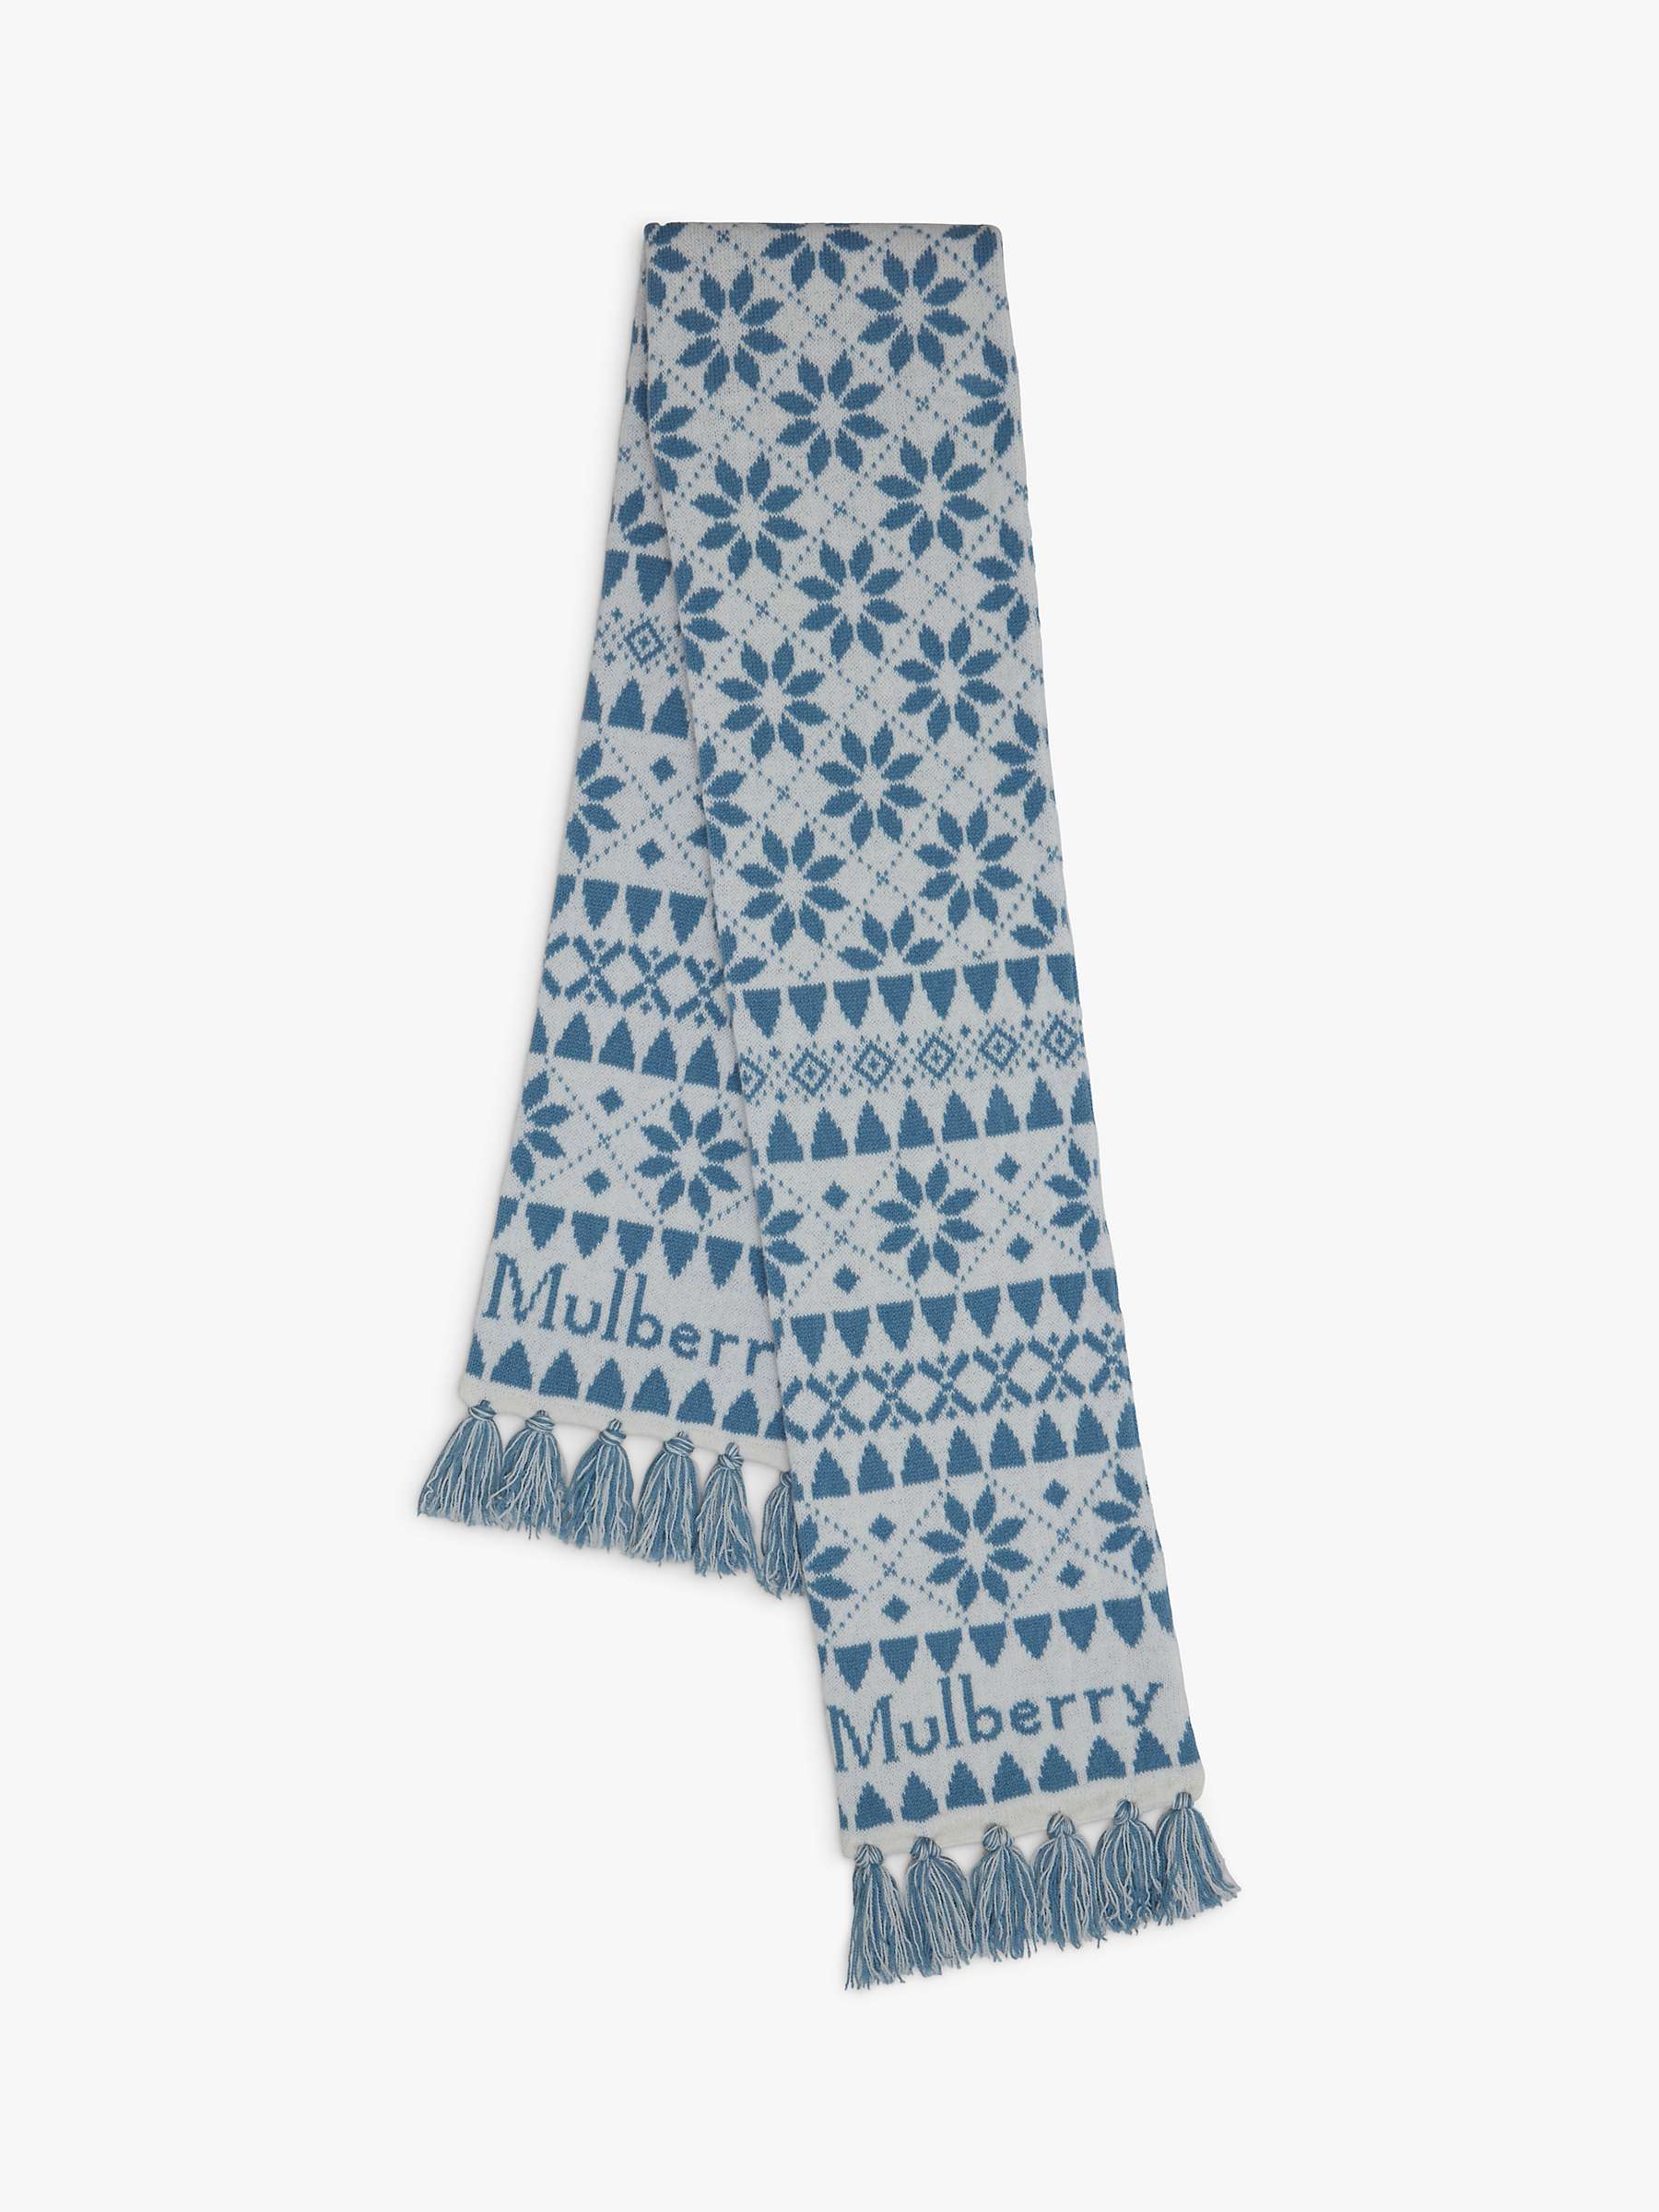 Buy Mulberry FairIsle Knit Scarf Online at johnlewis.com